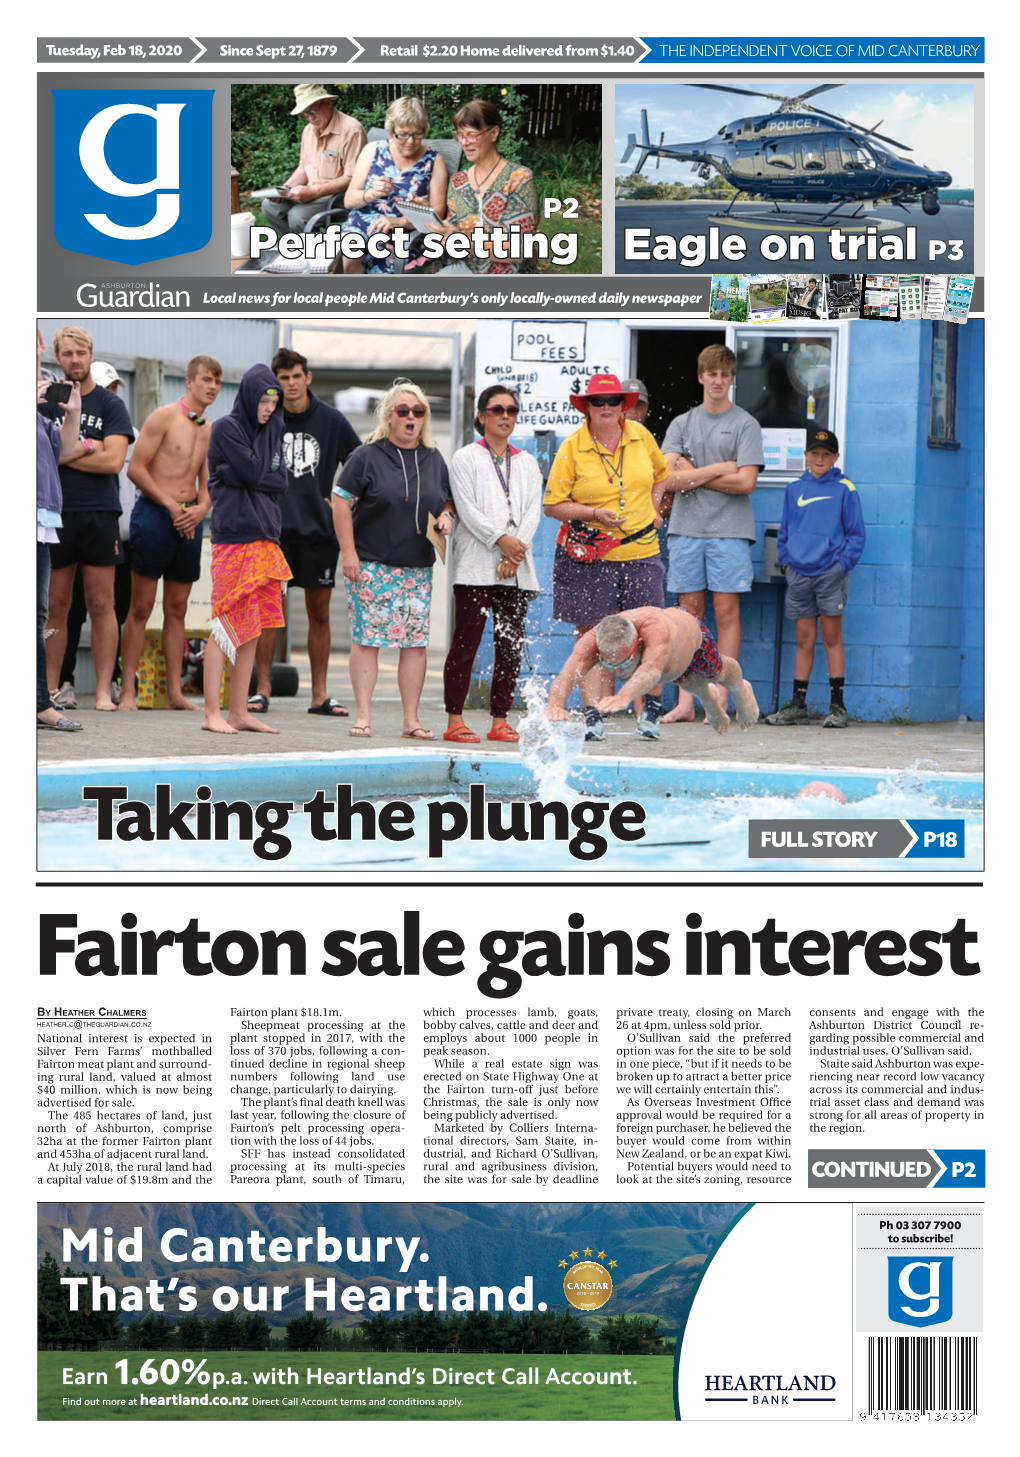 Taking the Plunge FULL STORY P18 Fairton Sale Gains Interest